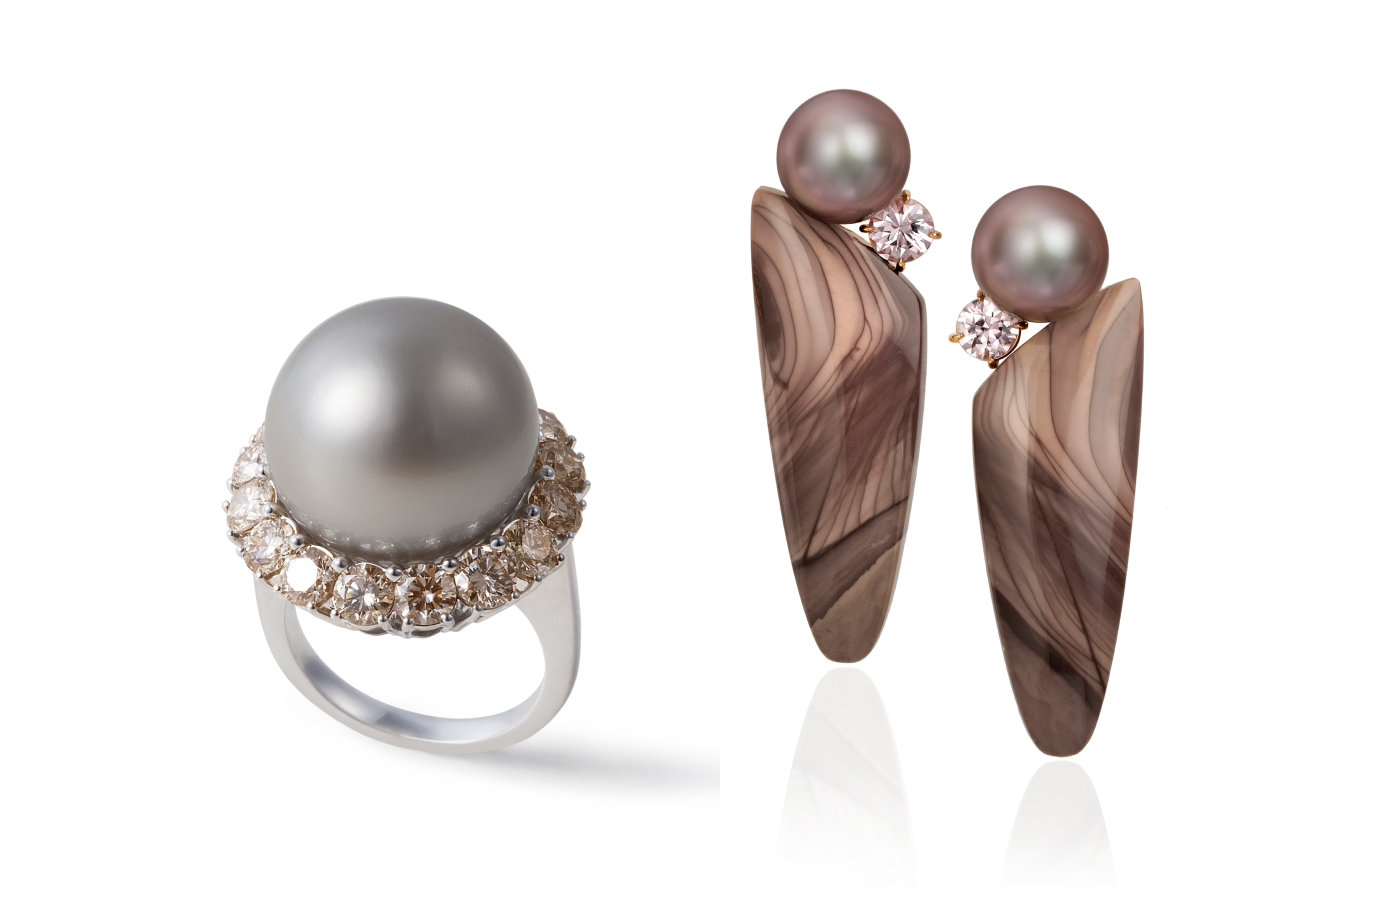 Utopia Jewels ring in white gold, Tahitian pearl and champagne diamond, alongside Assael earrings in rose gold, jasper, spinel and Fijian pearl 